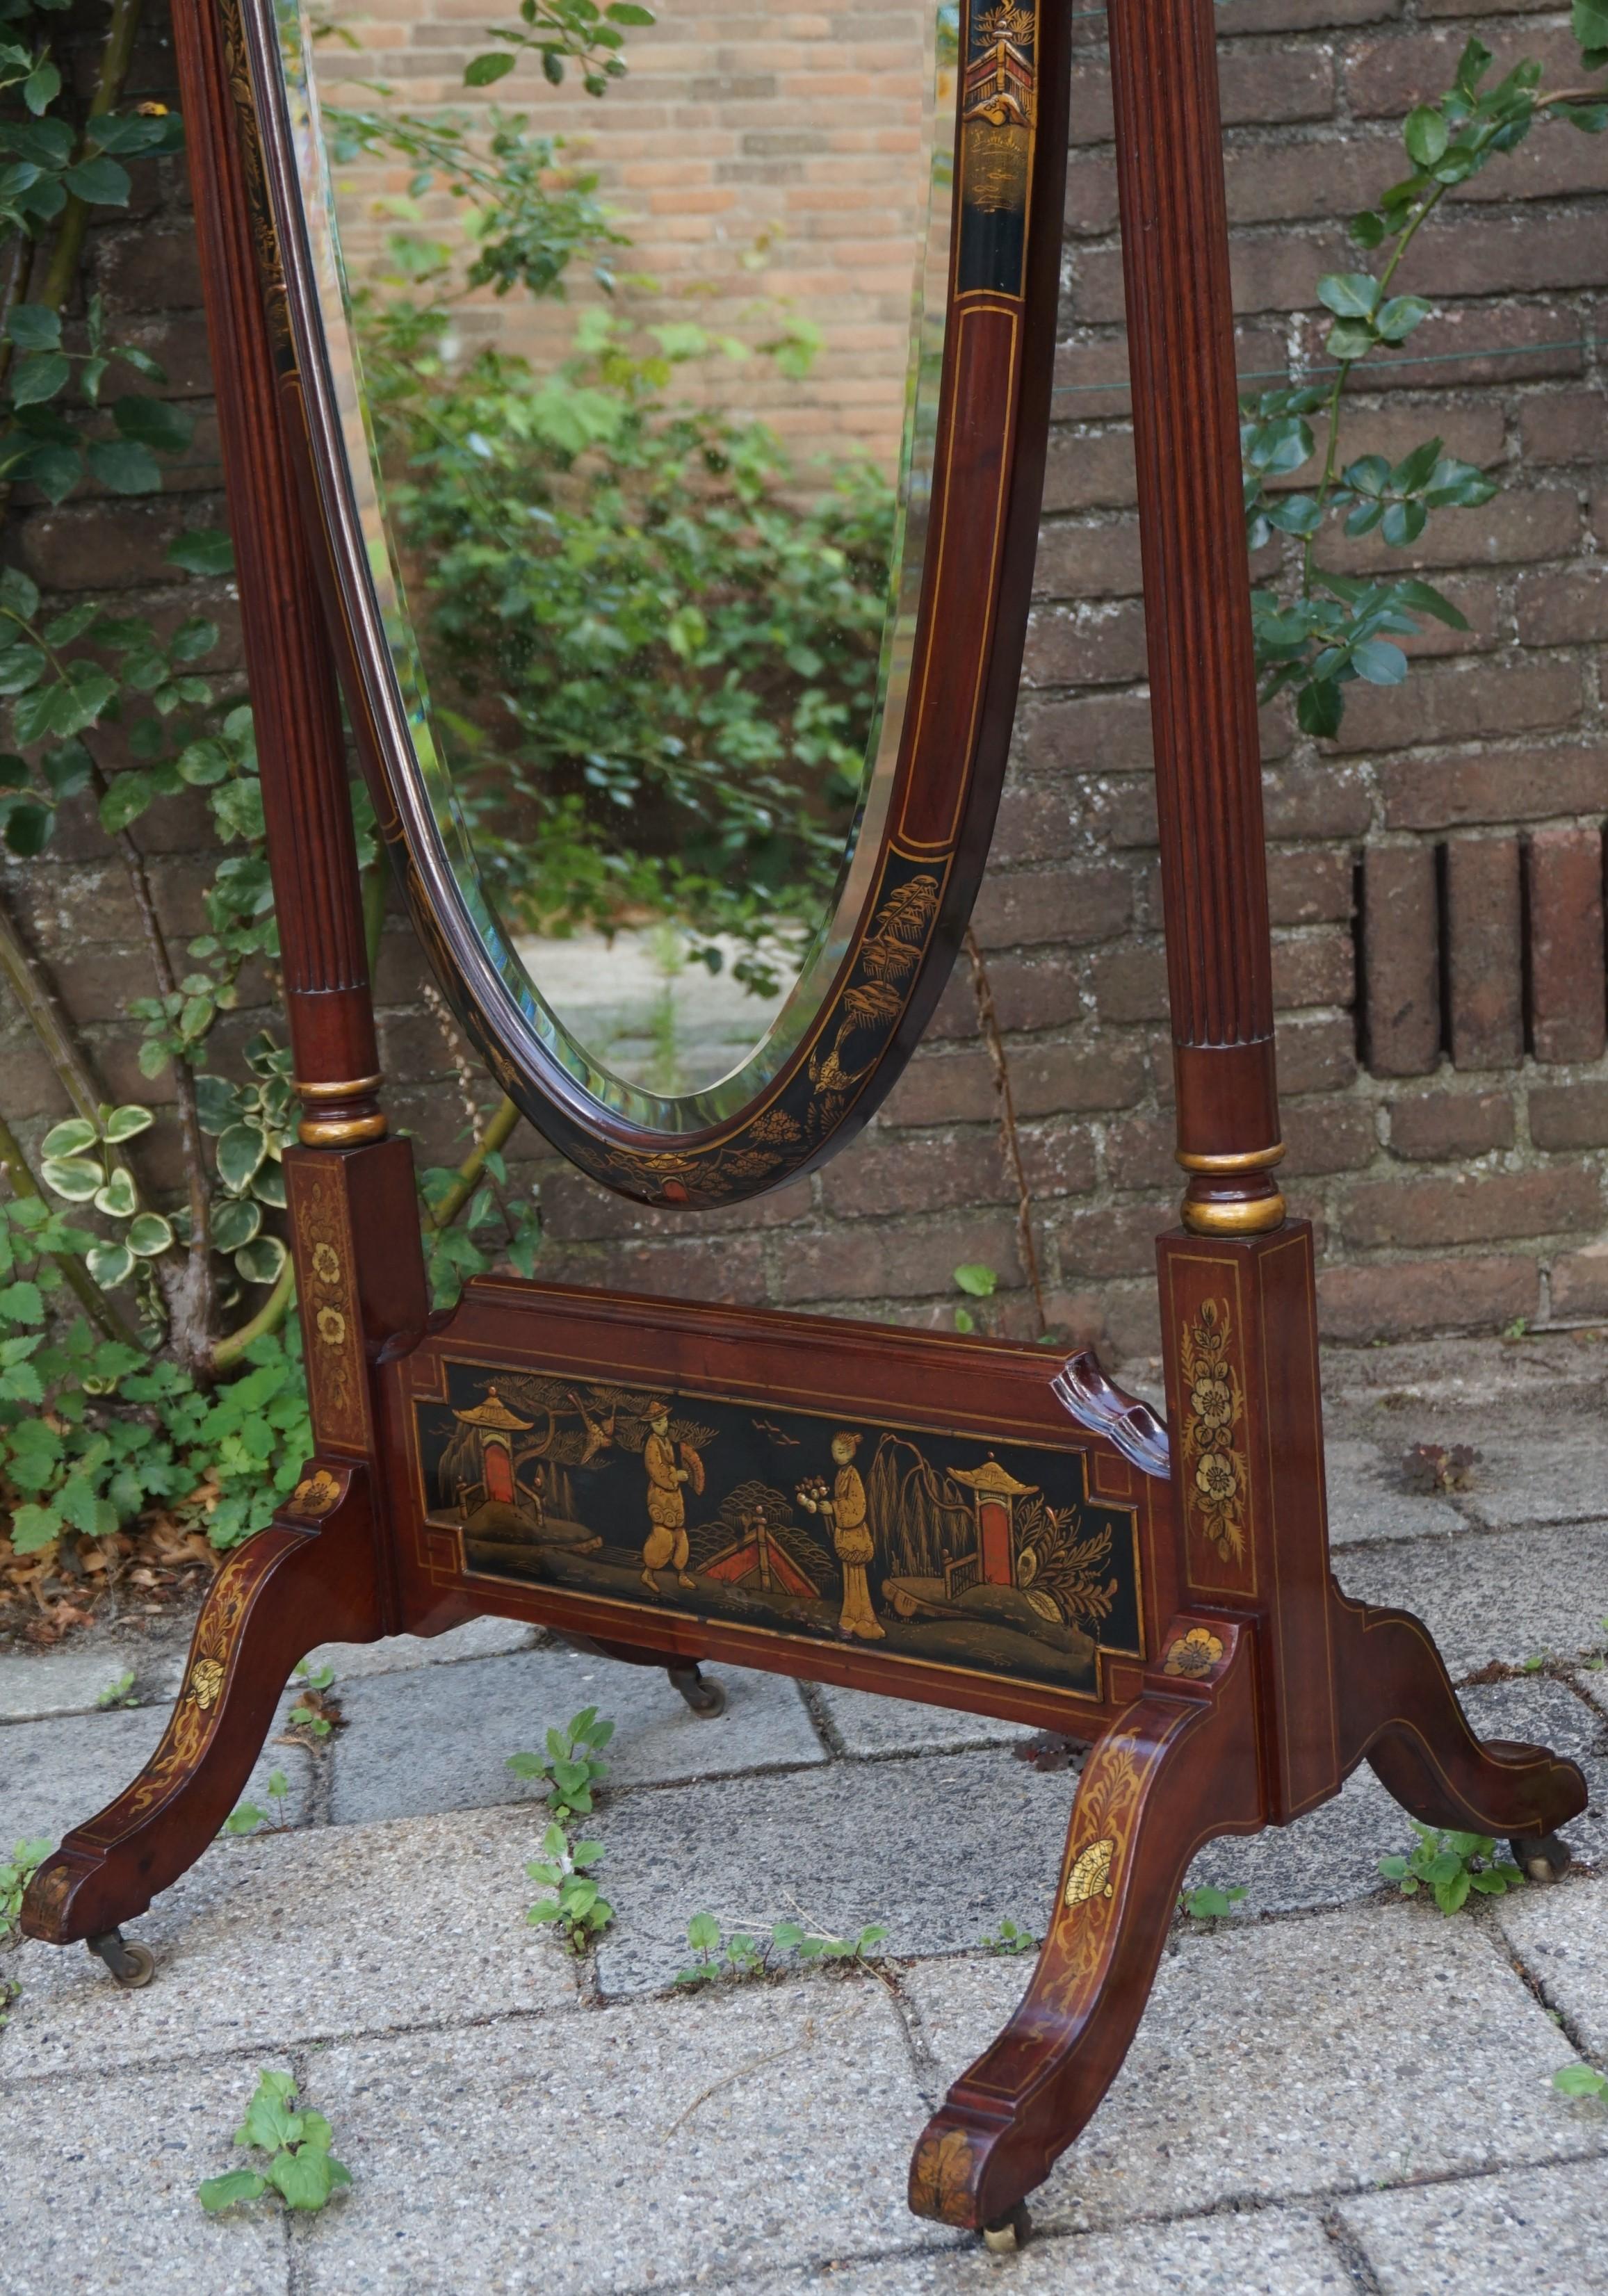 Unique Chinoiserie mirror with courting male and female decor.

This movable antique mirror in the Chinoiserie style is the second piece of a unique bedroom suite that we are offering to the 1stdibs community and it is almost perfect. It stands on